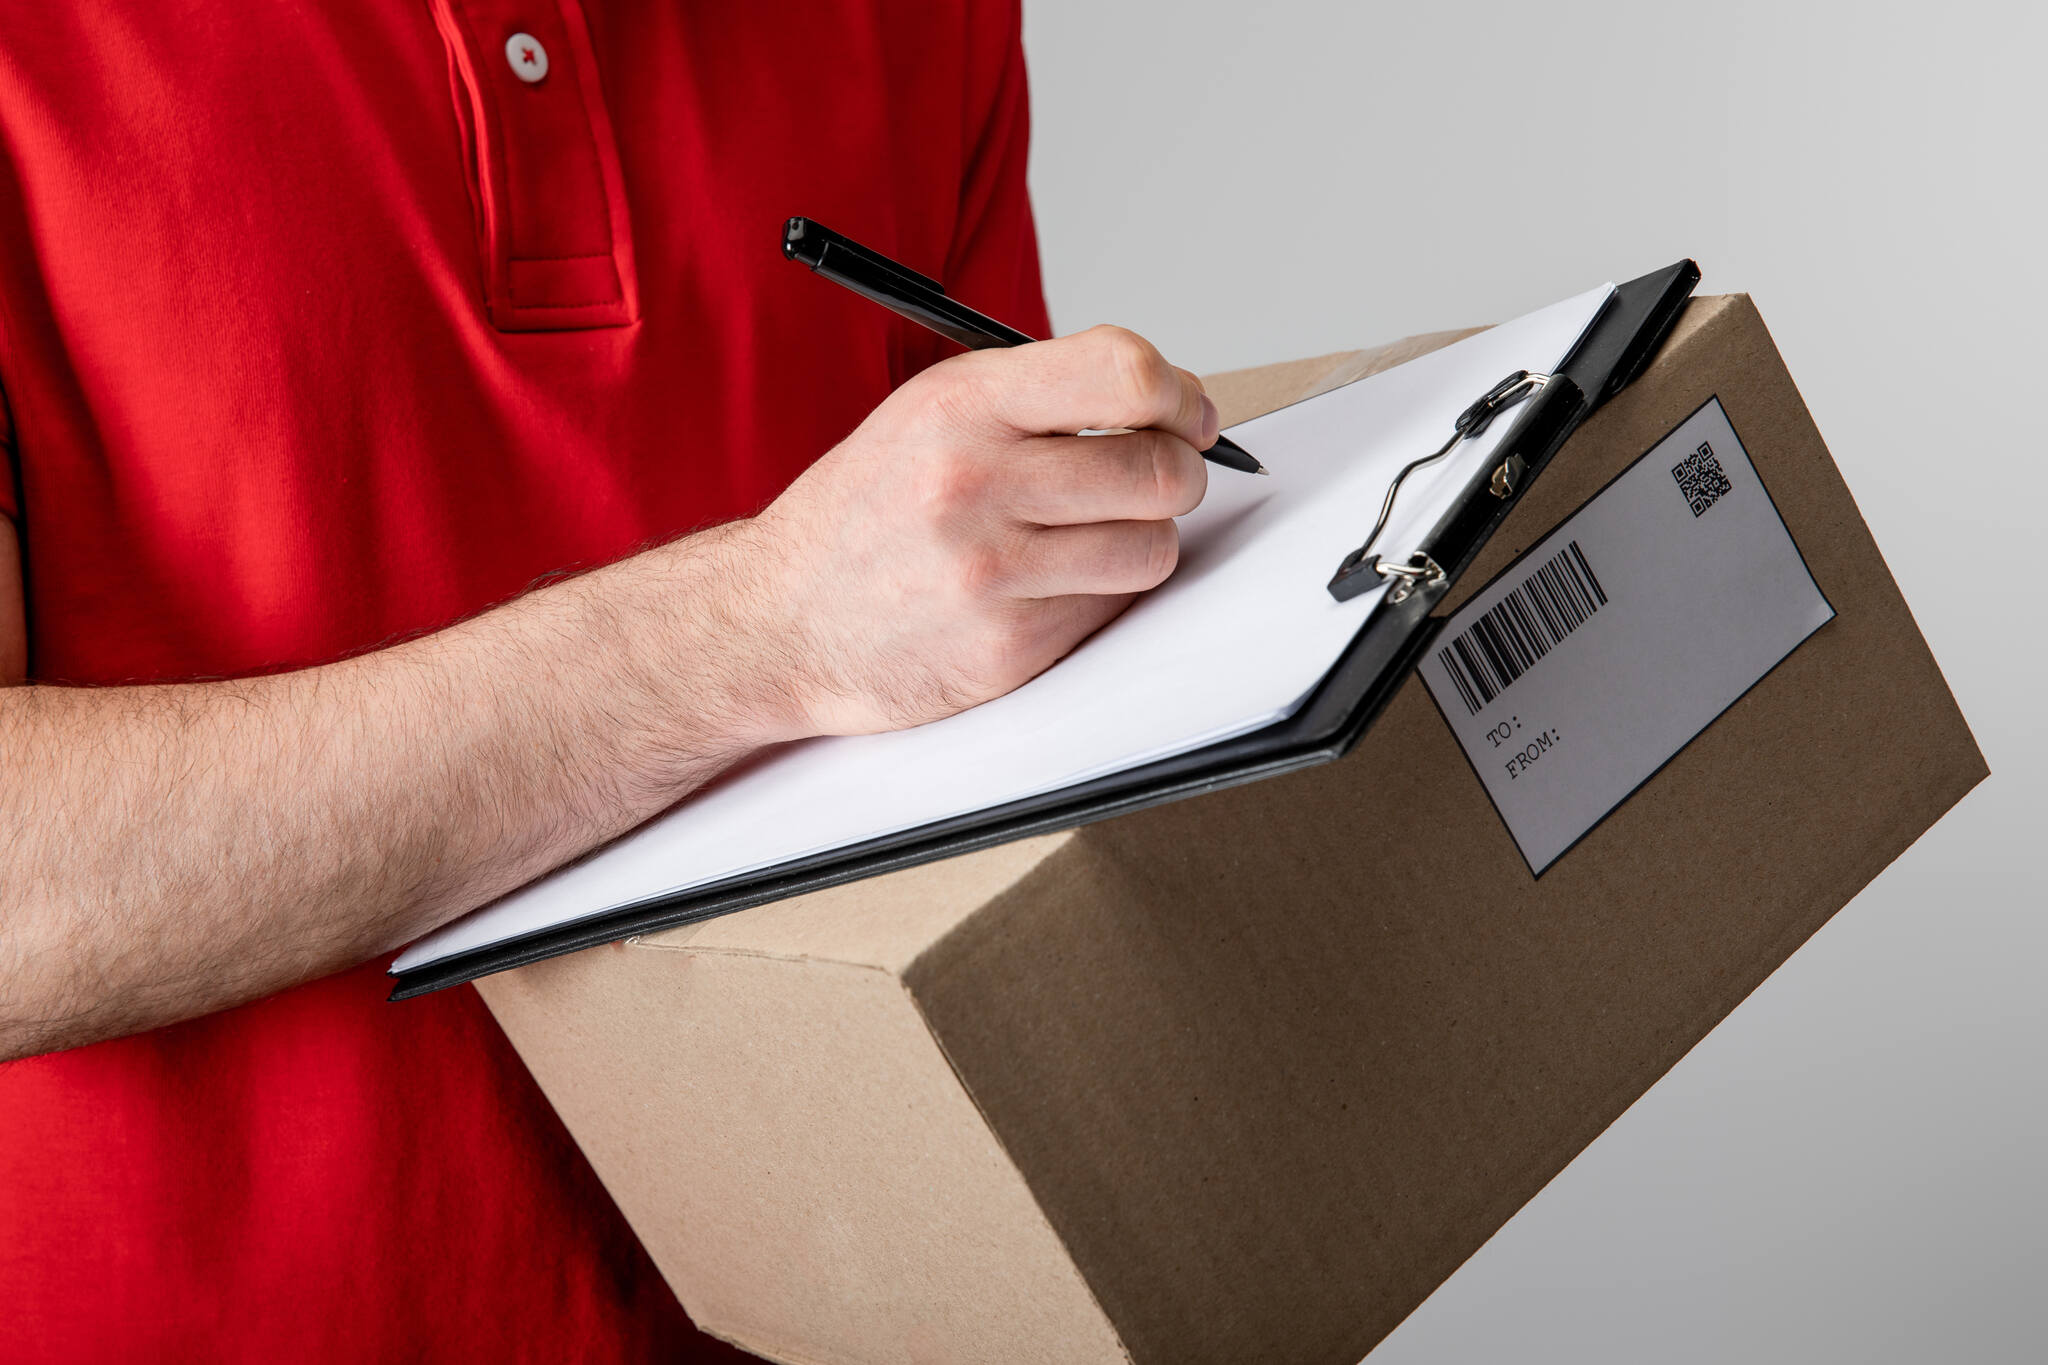 a cropped view of a person writing on a paper and holding a package with a QR code